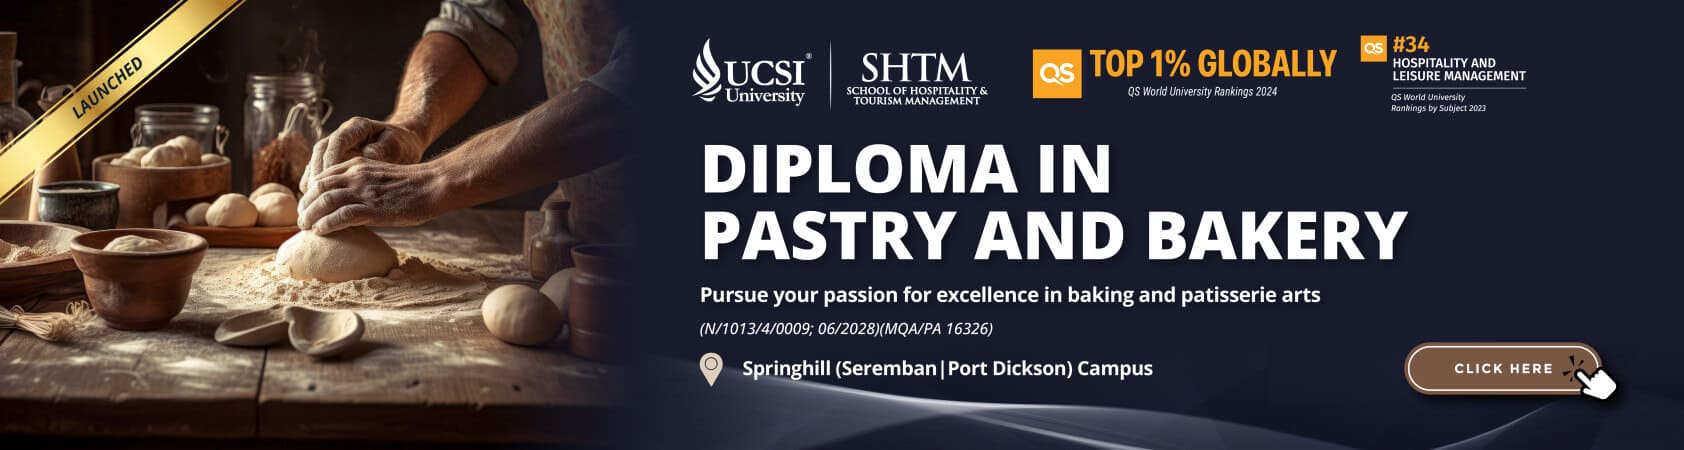 Diploma in Pastry and Bakery